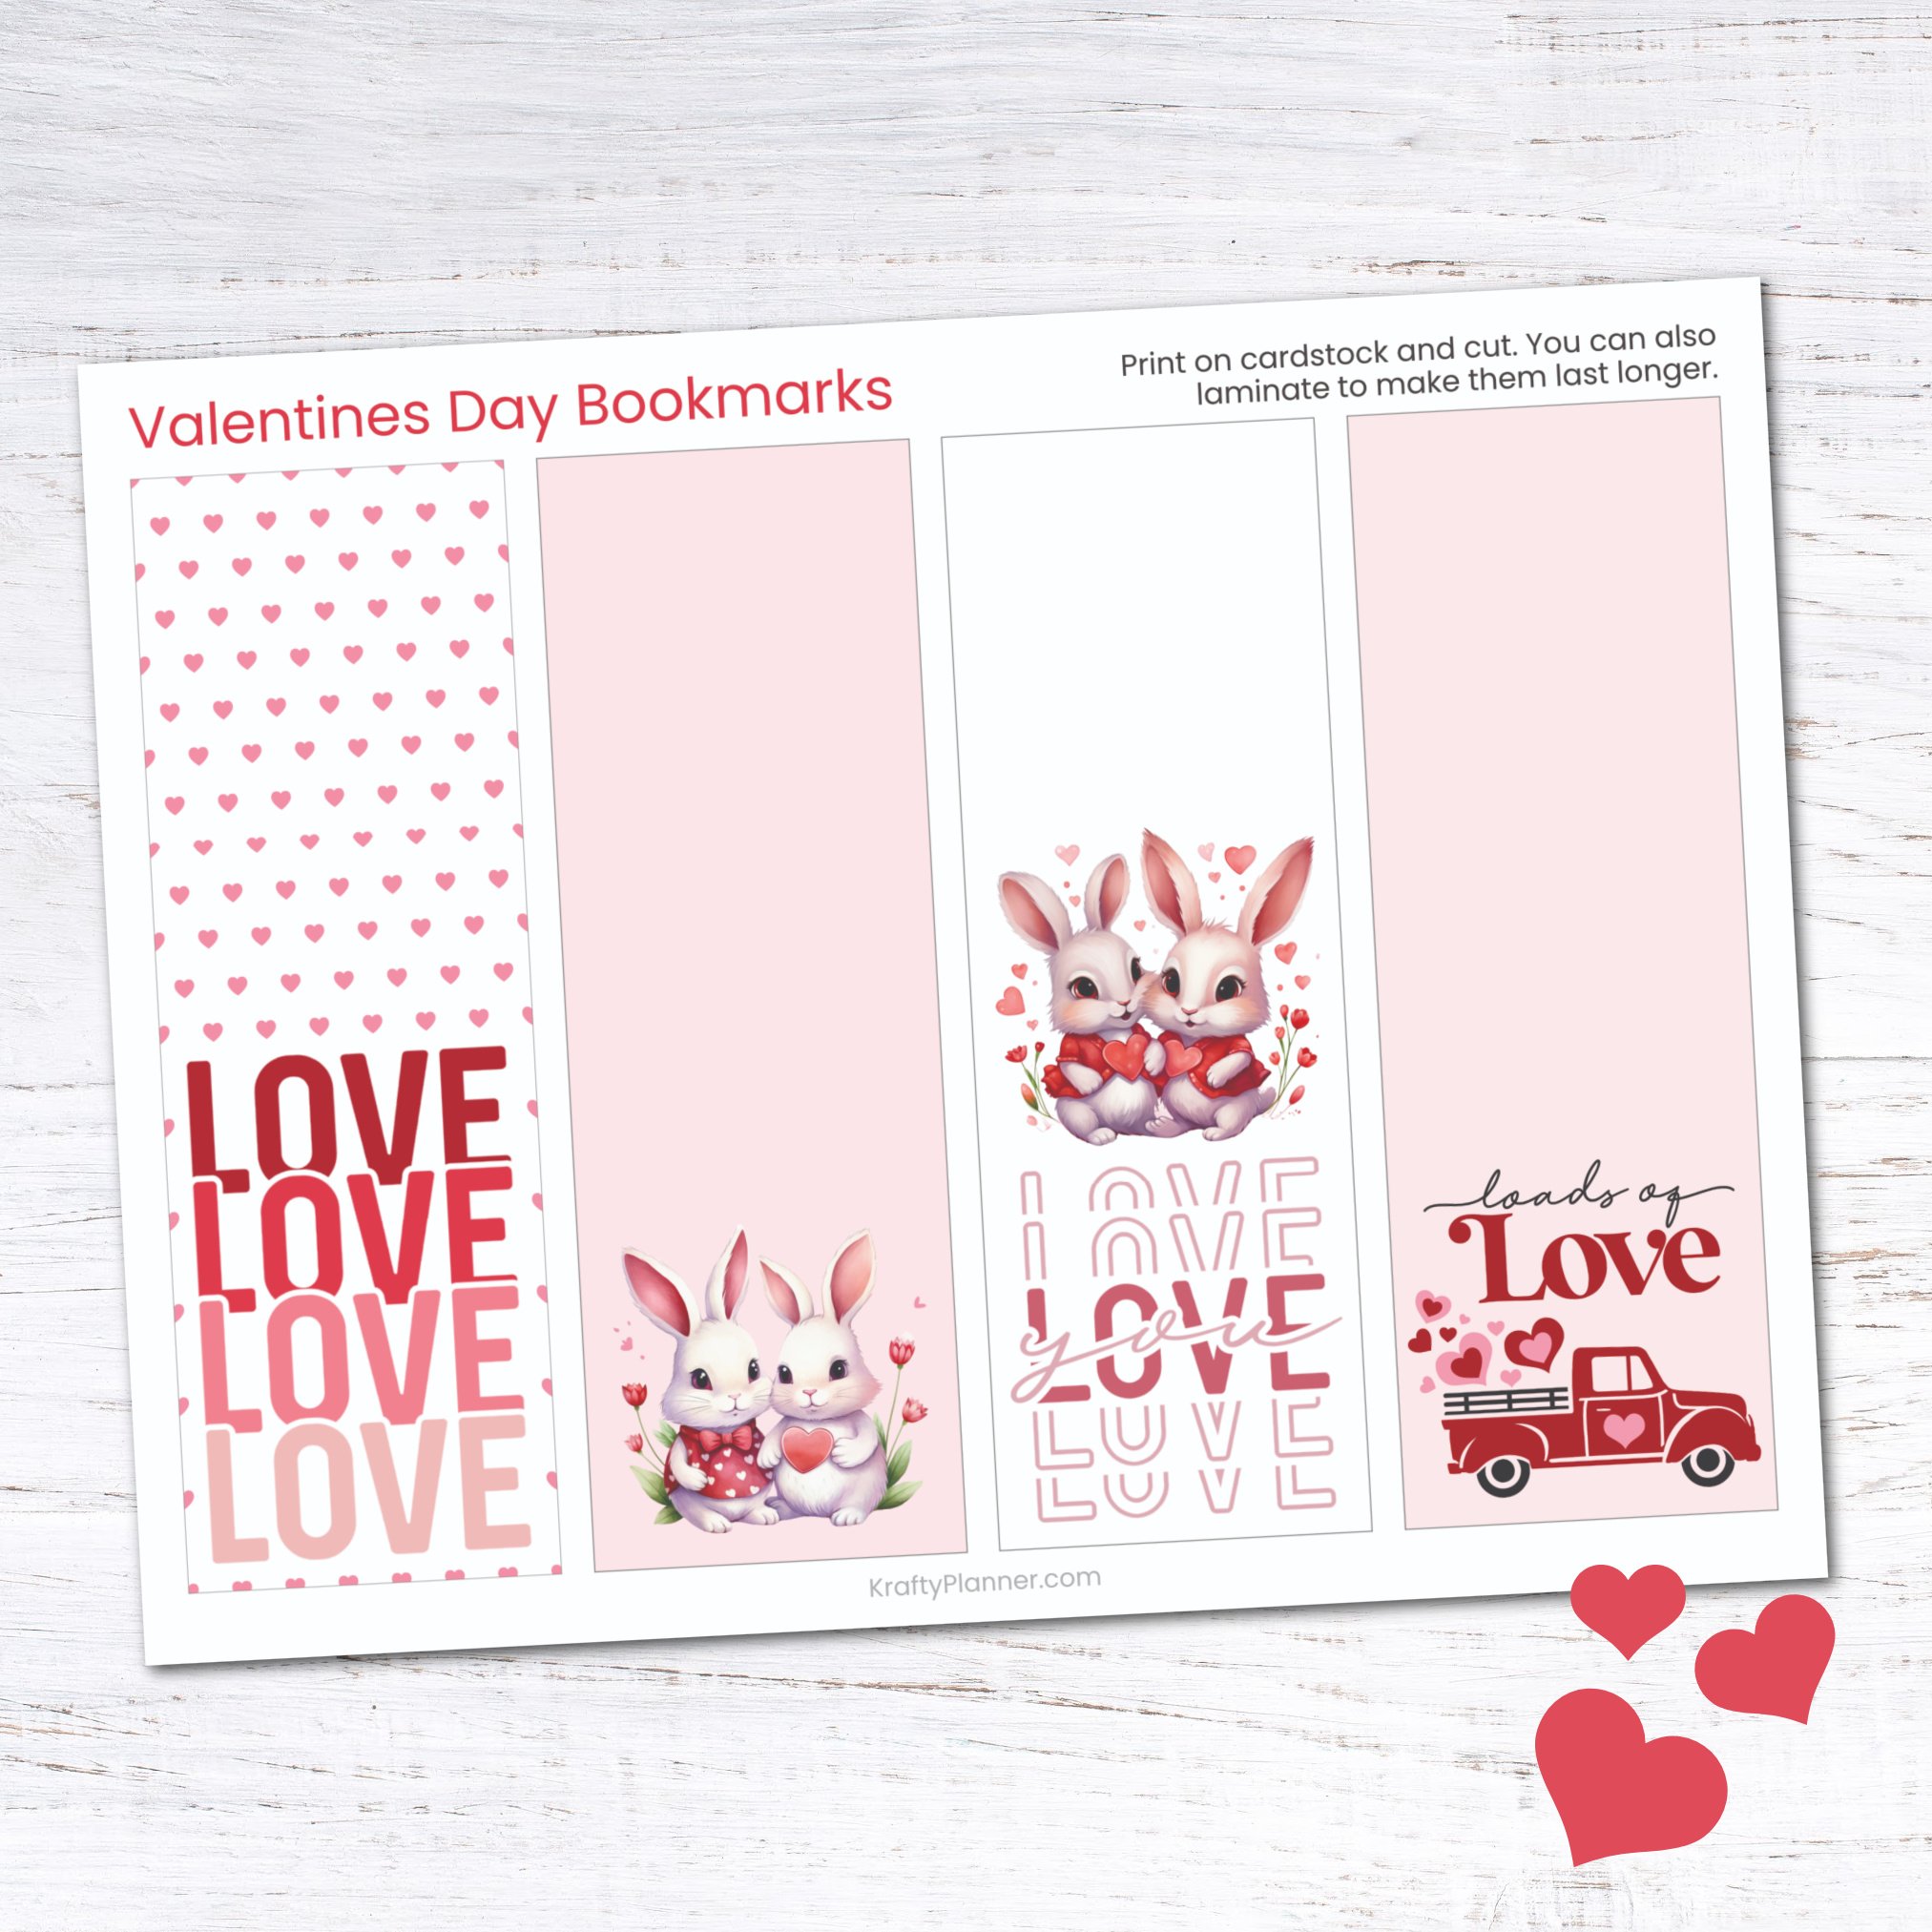 Share the Love of Reading: Free Printable Valentine's Day Bookmarks